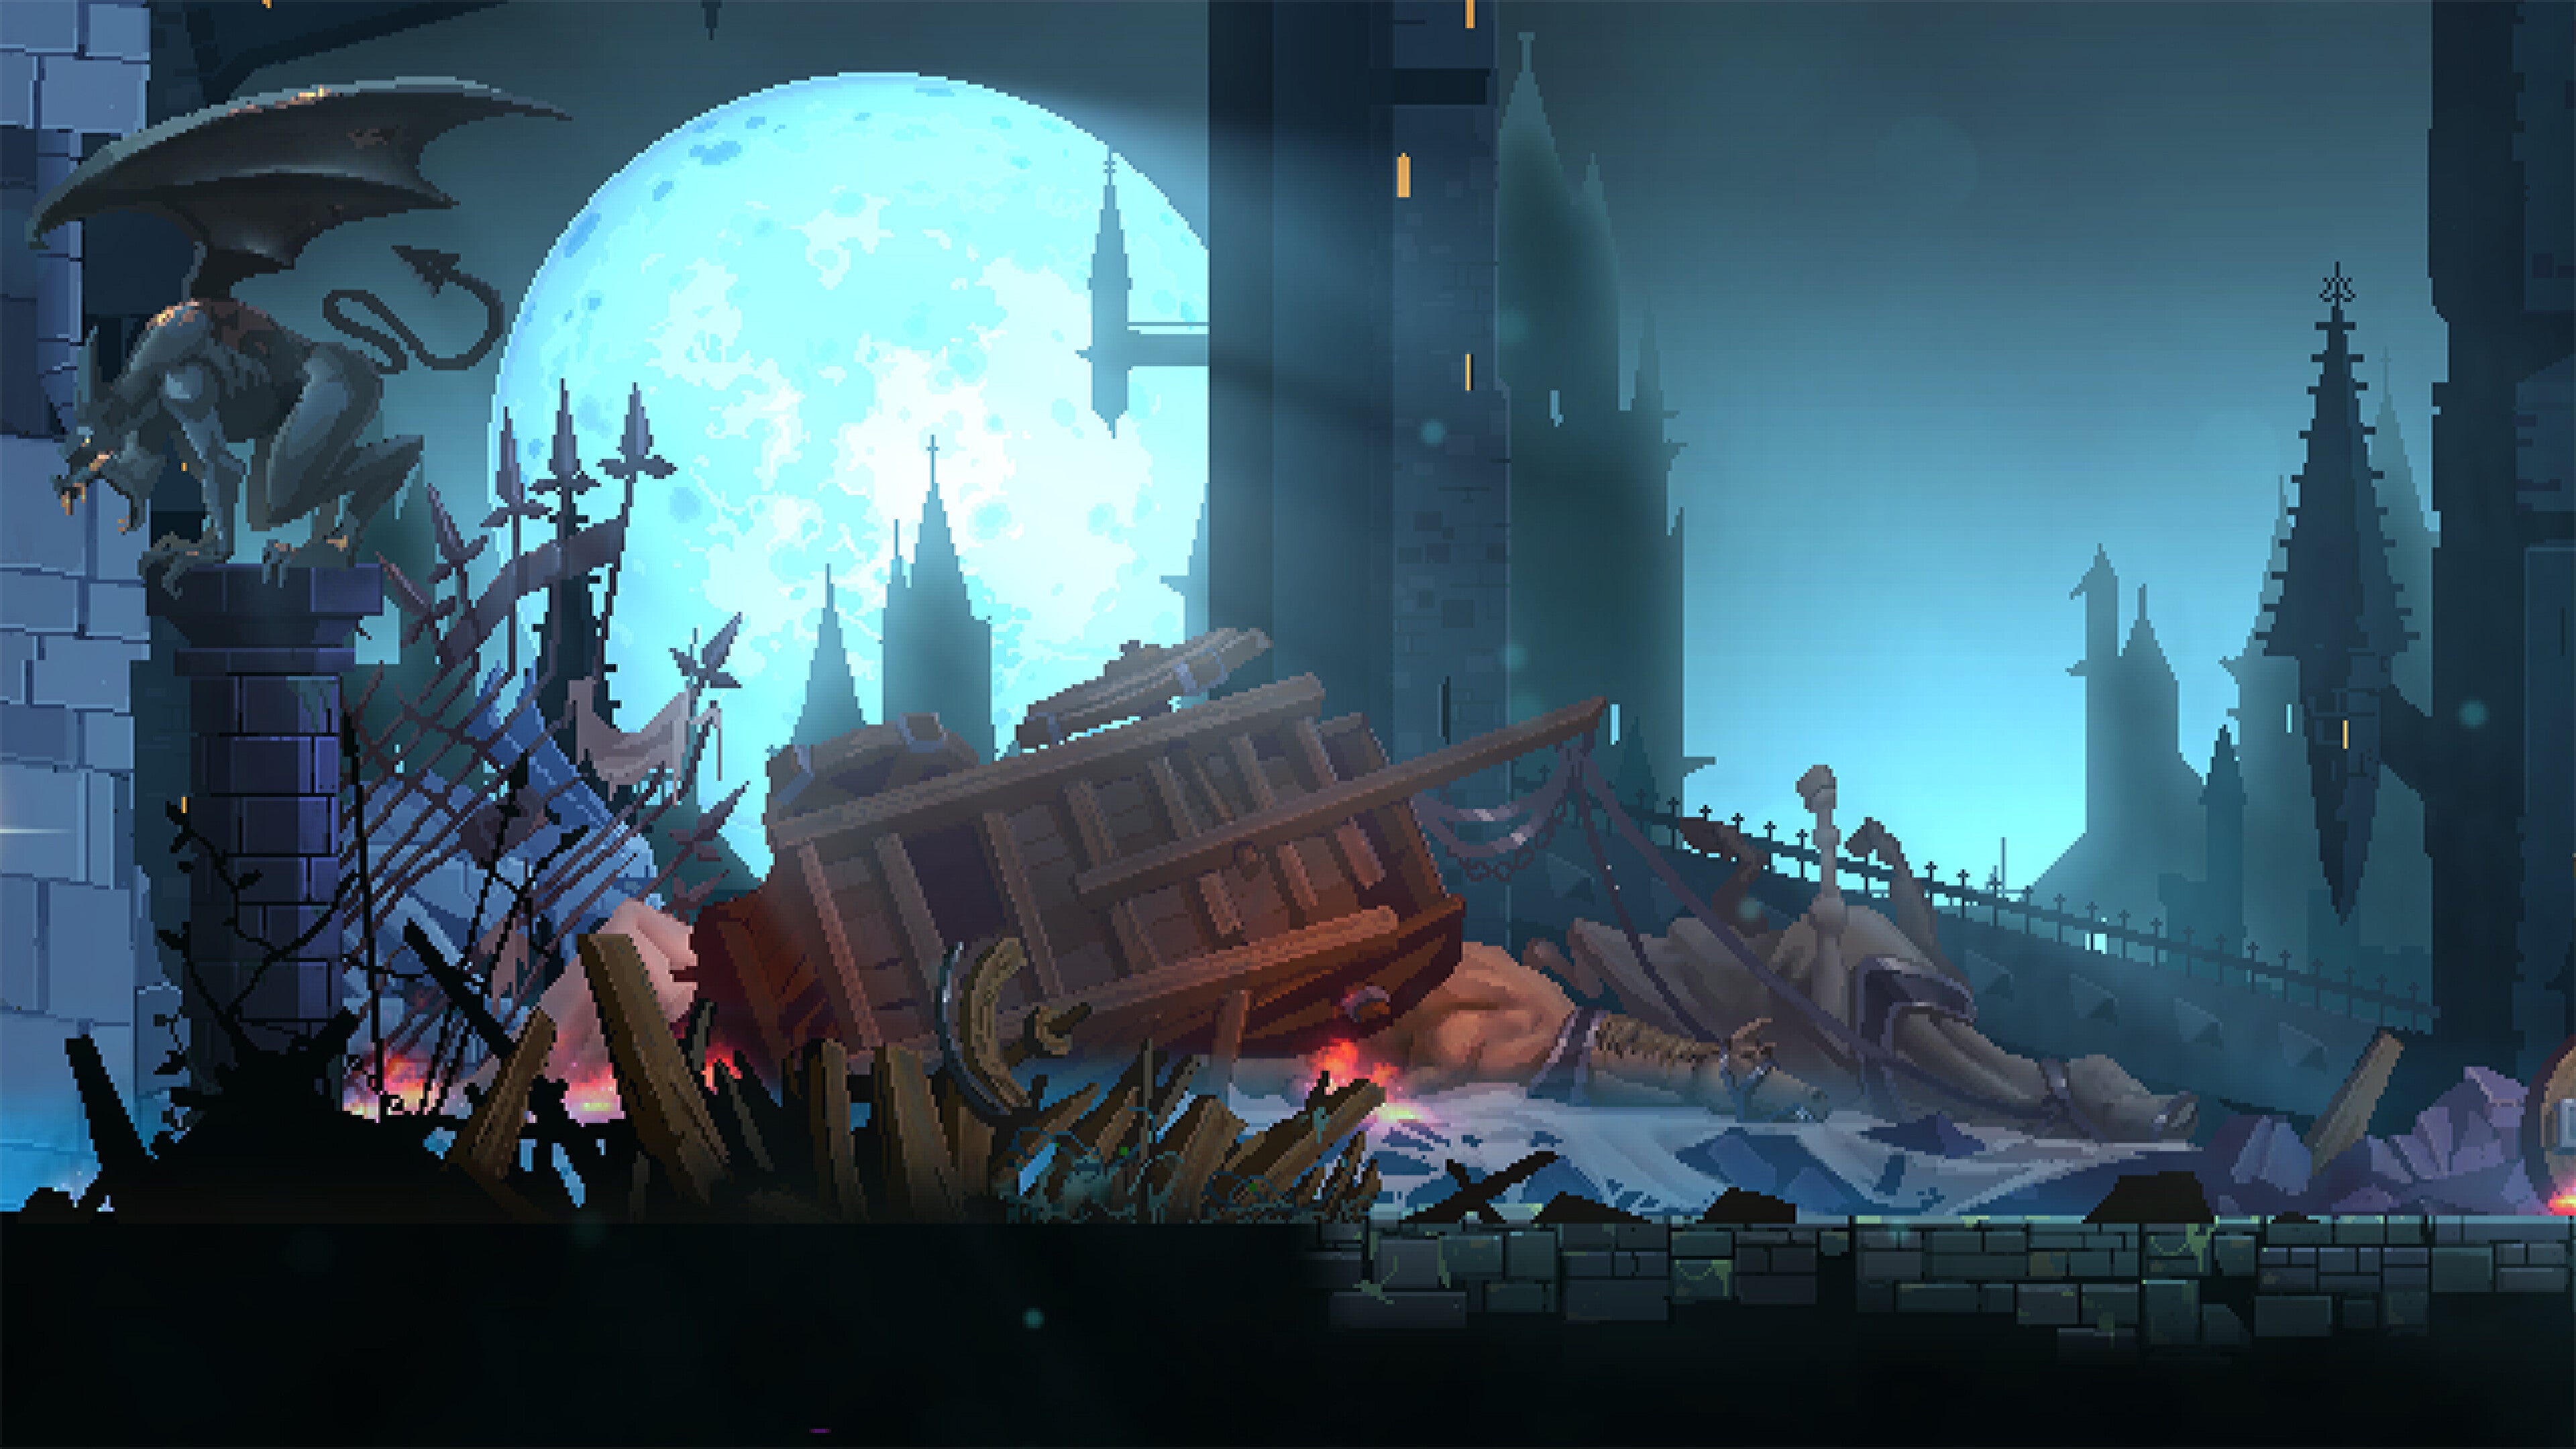 Dead Cells' Return to Castlevania DLC will let you play as Richter Belmont